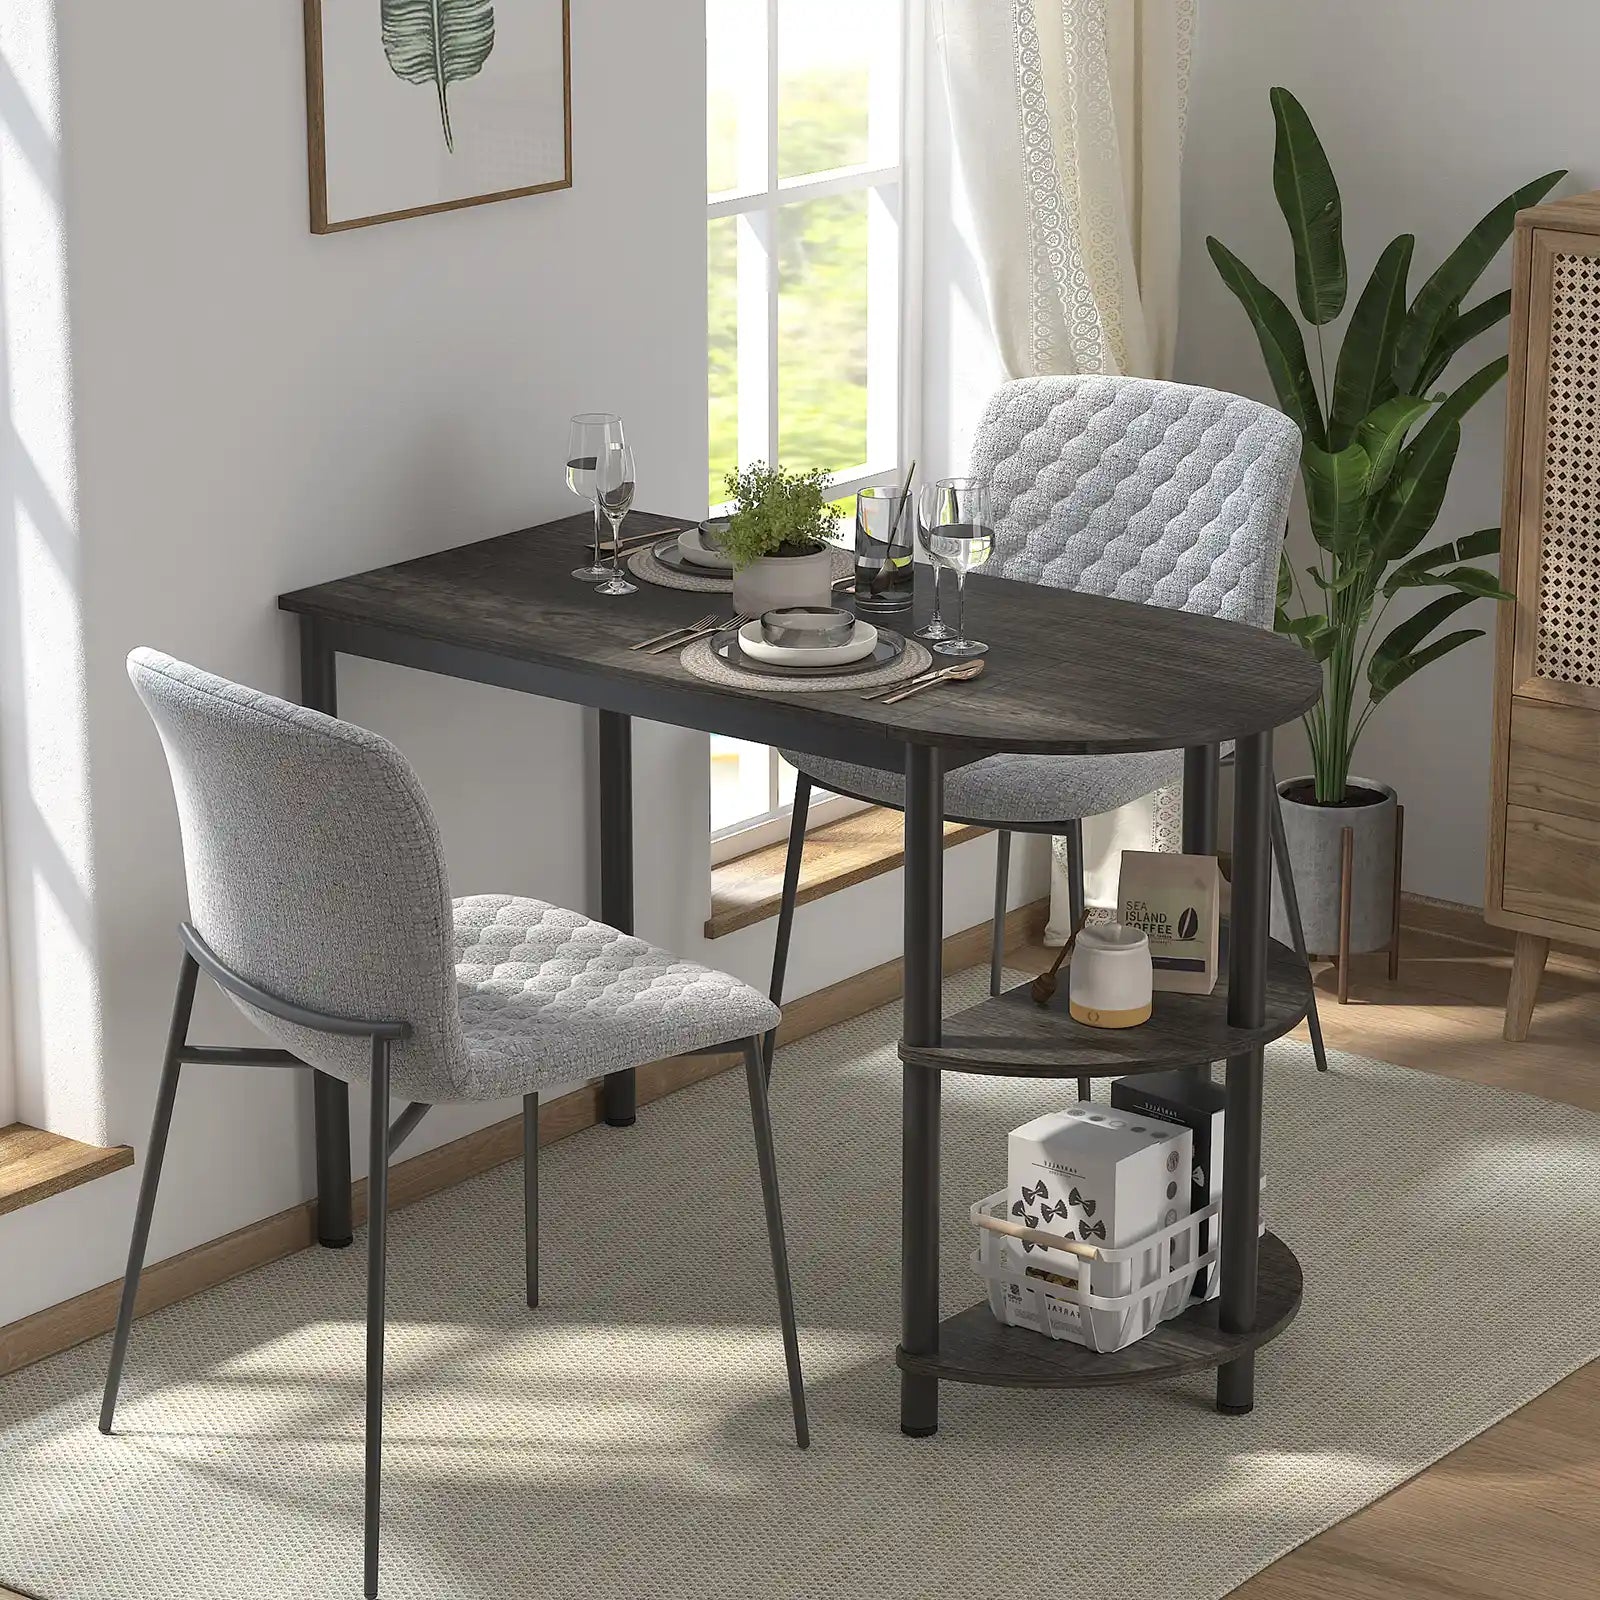 Dining Table for Small Space Kitchen Dining Room Table with Storage